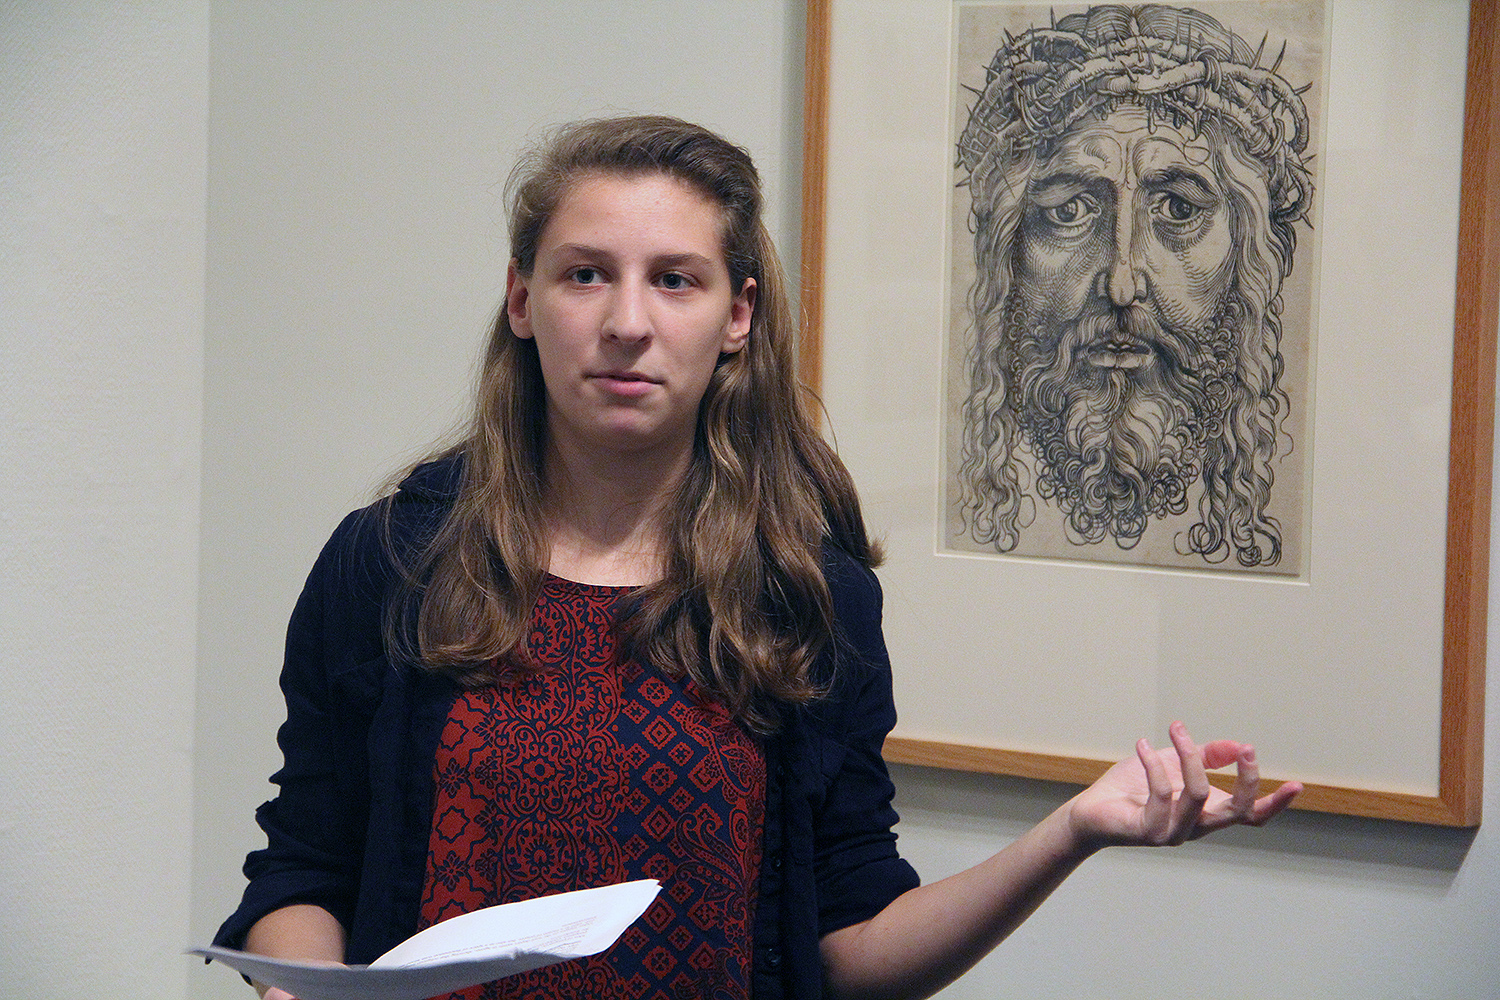 During the exhibition opening, student curators led a gallery talk that explored topics such as the fascination with the Apocalypse, printmaking and the rise of the Reformation, the use of prints as propaganda for Holy Roman Emperor Maximilian I, and the new interest in scientific observation and the natural world.